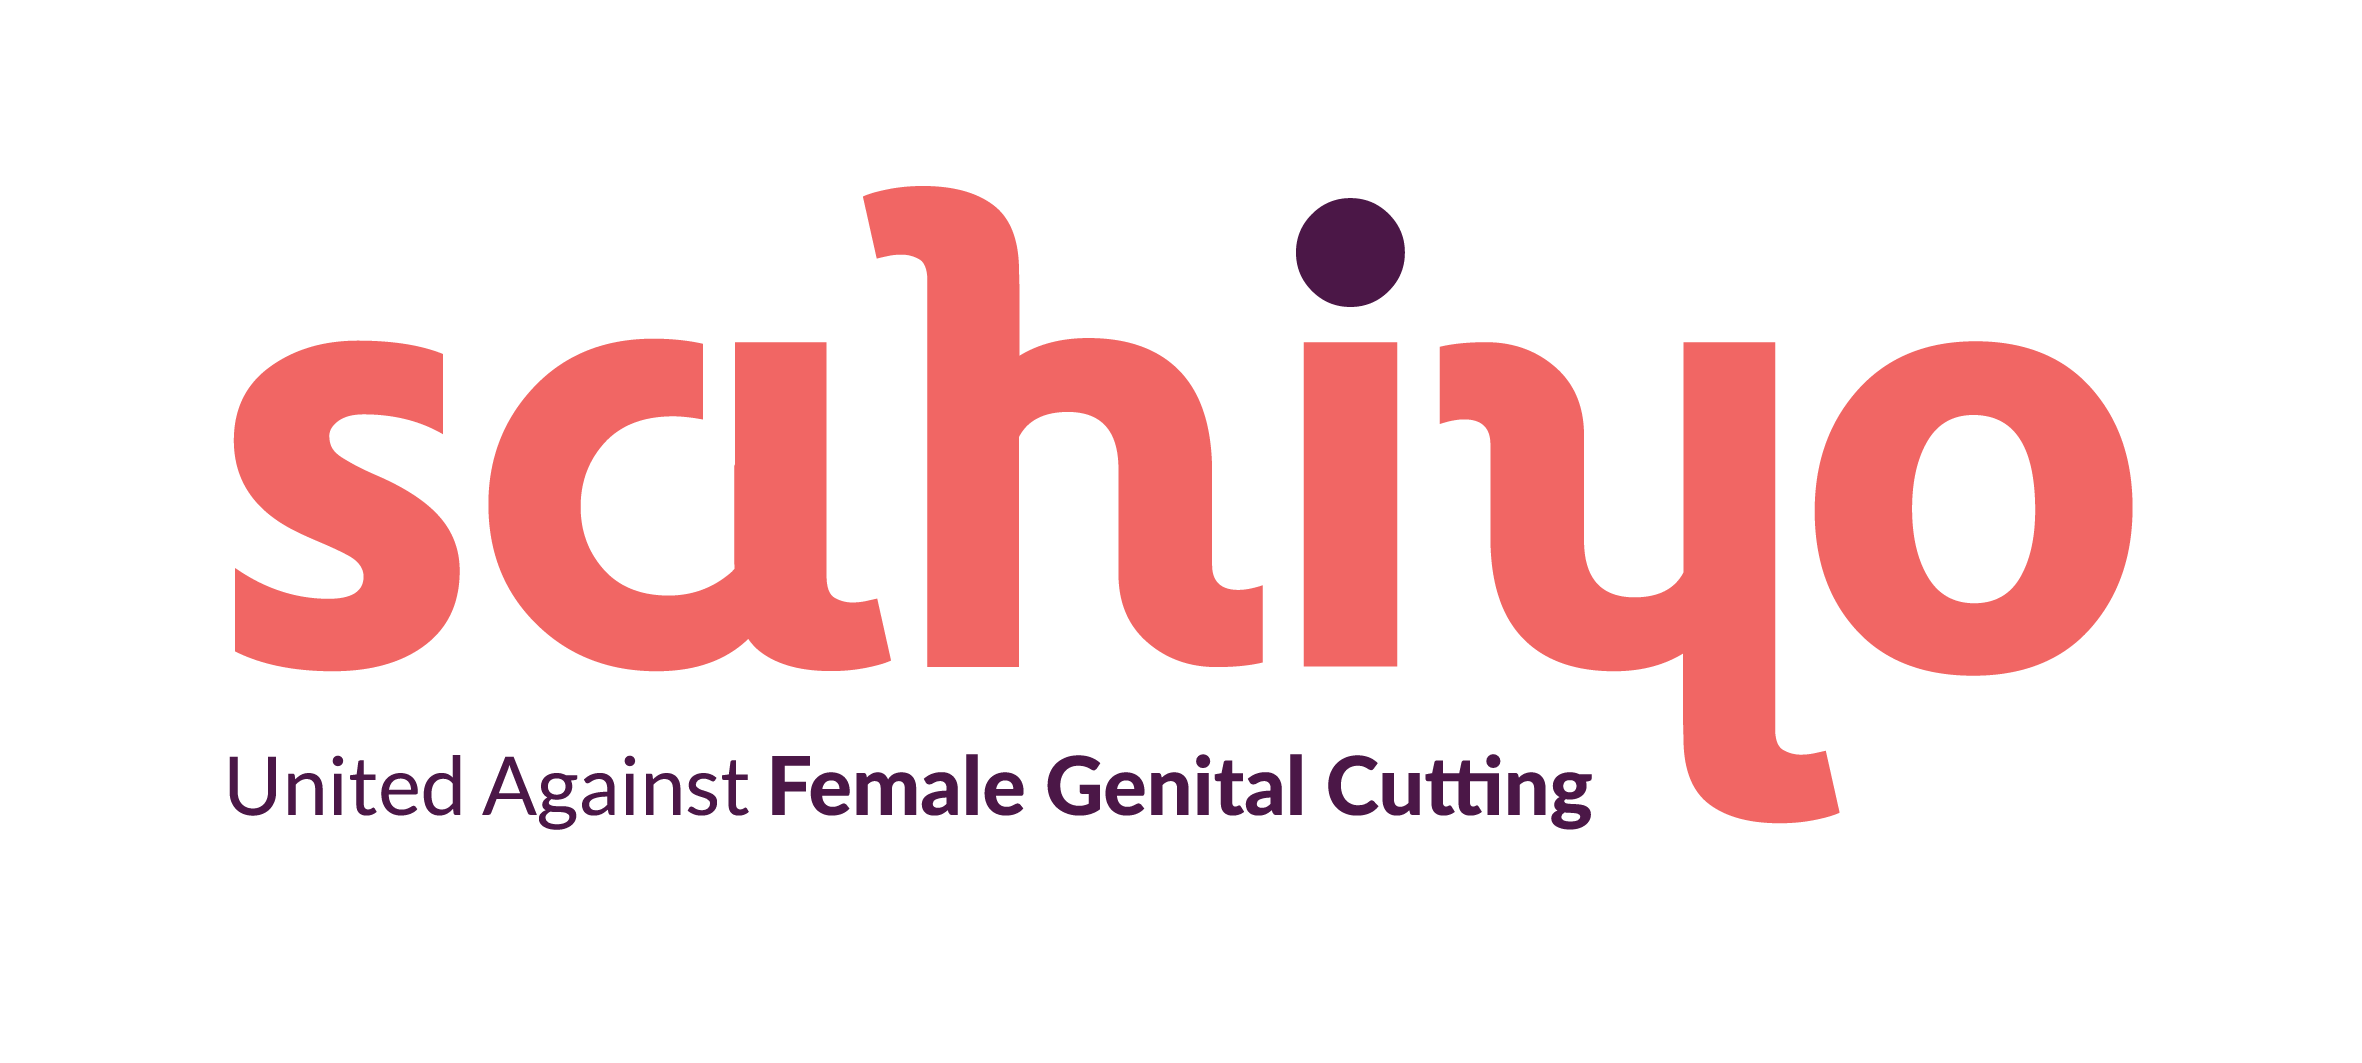 PRESS RELEASE: A pioneering Roundtable to Address Female Genital Mutilation/Cutting in Massachusetts